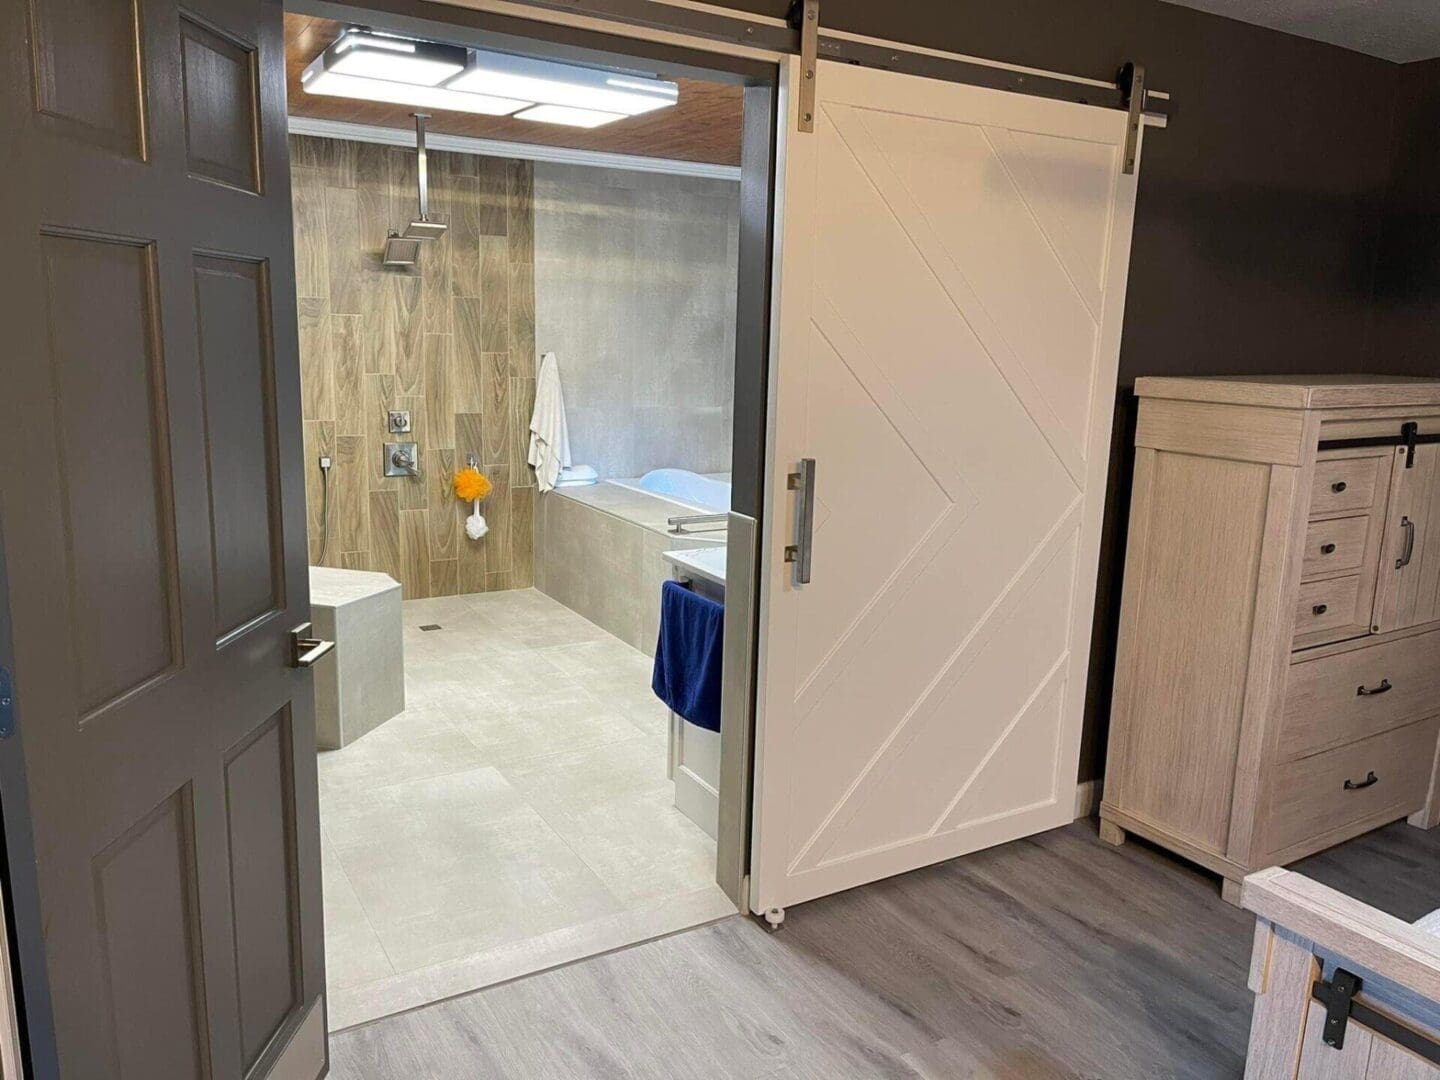 A bathroom with a tub and shower next to the door.